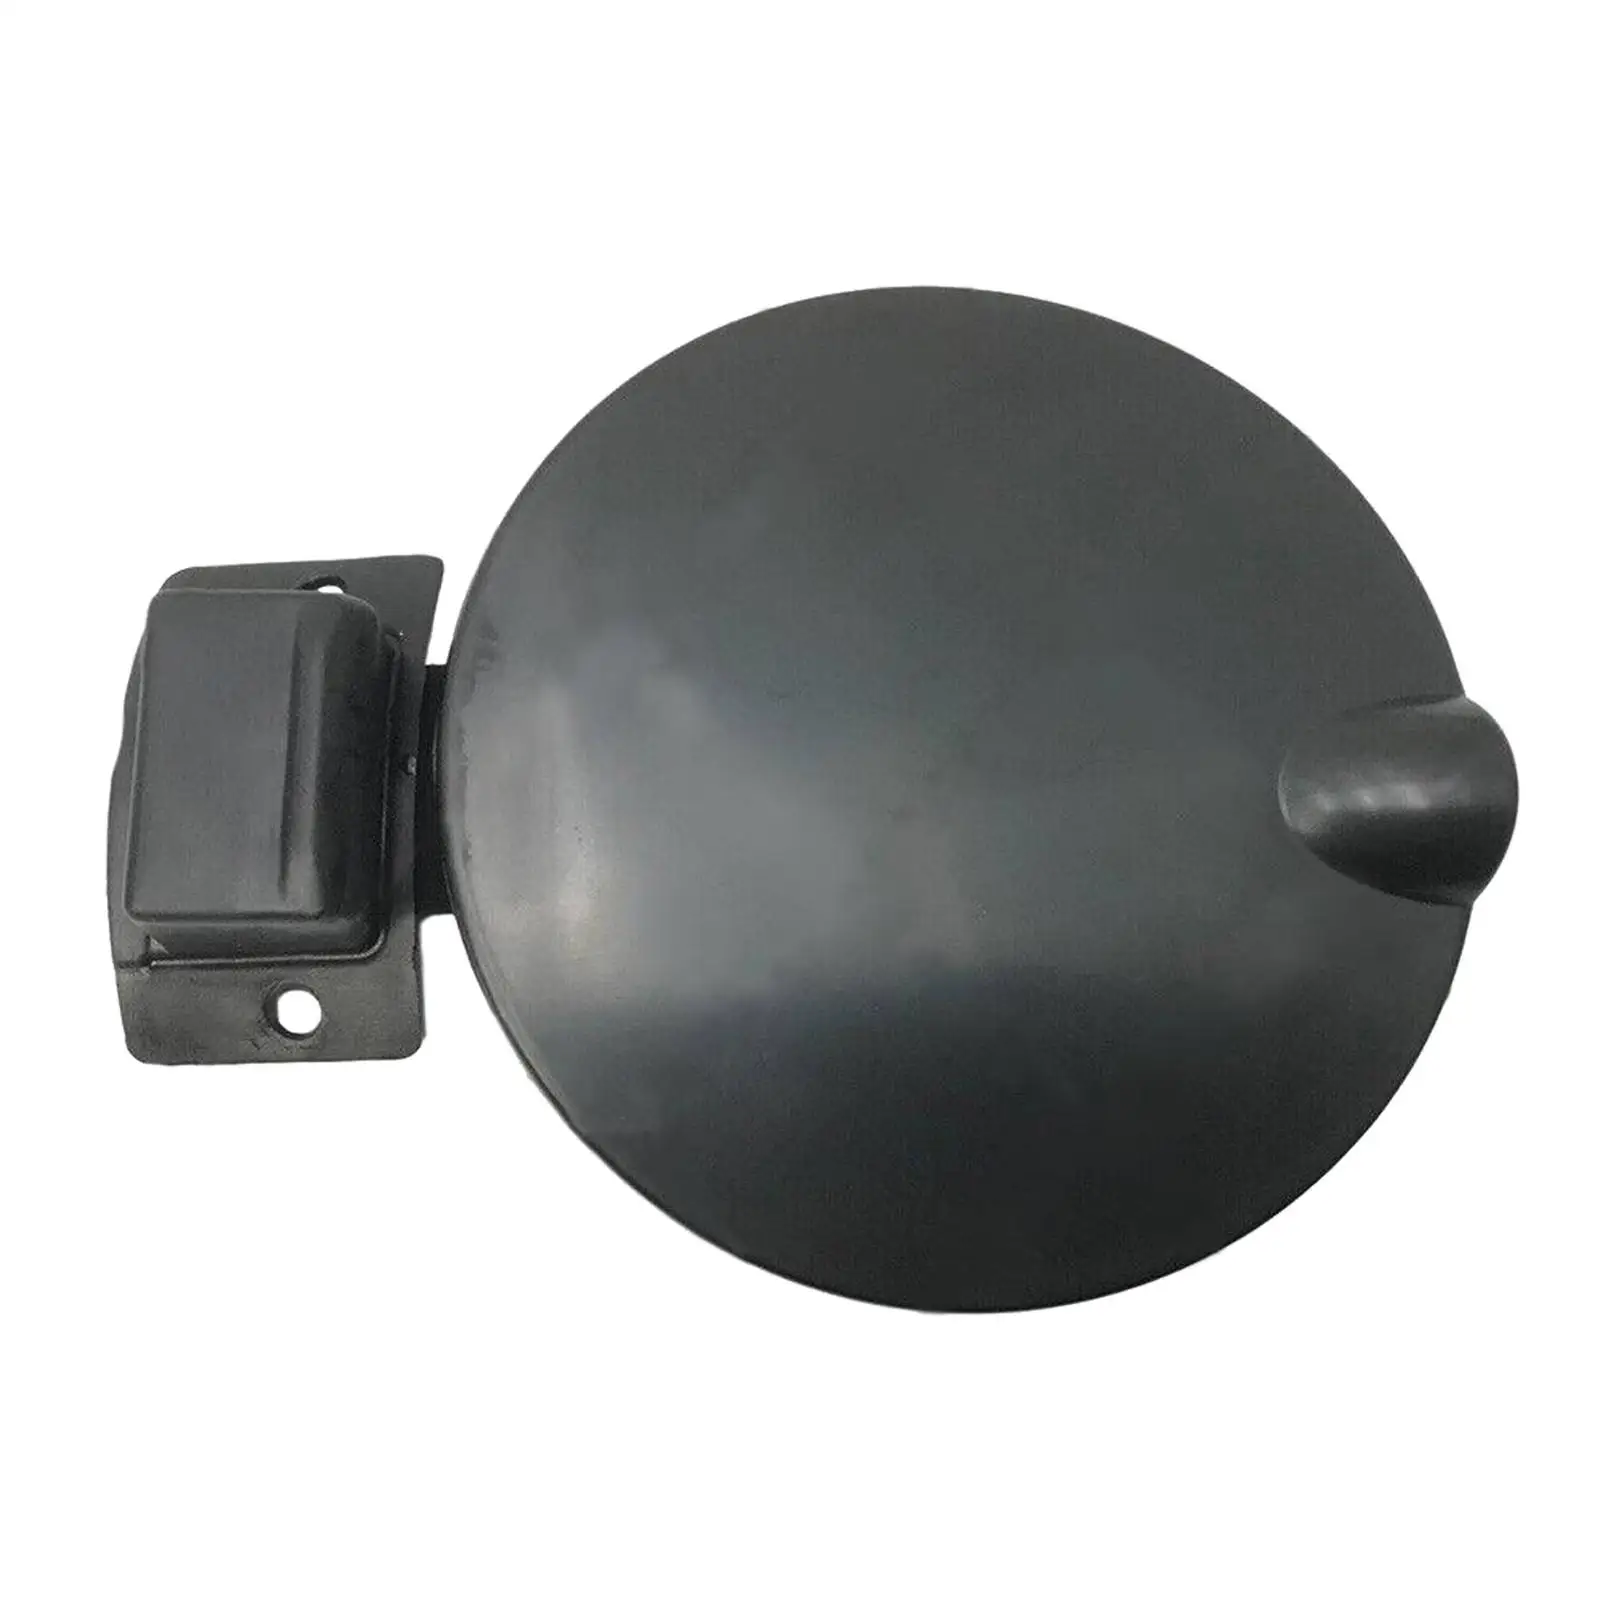 Fuel Filler Flap Fuel Tank Cap Modification Fuel Filler Flap Cover Lid for Holden Ute VU Vy Vz Sturdy Easily Install